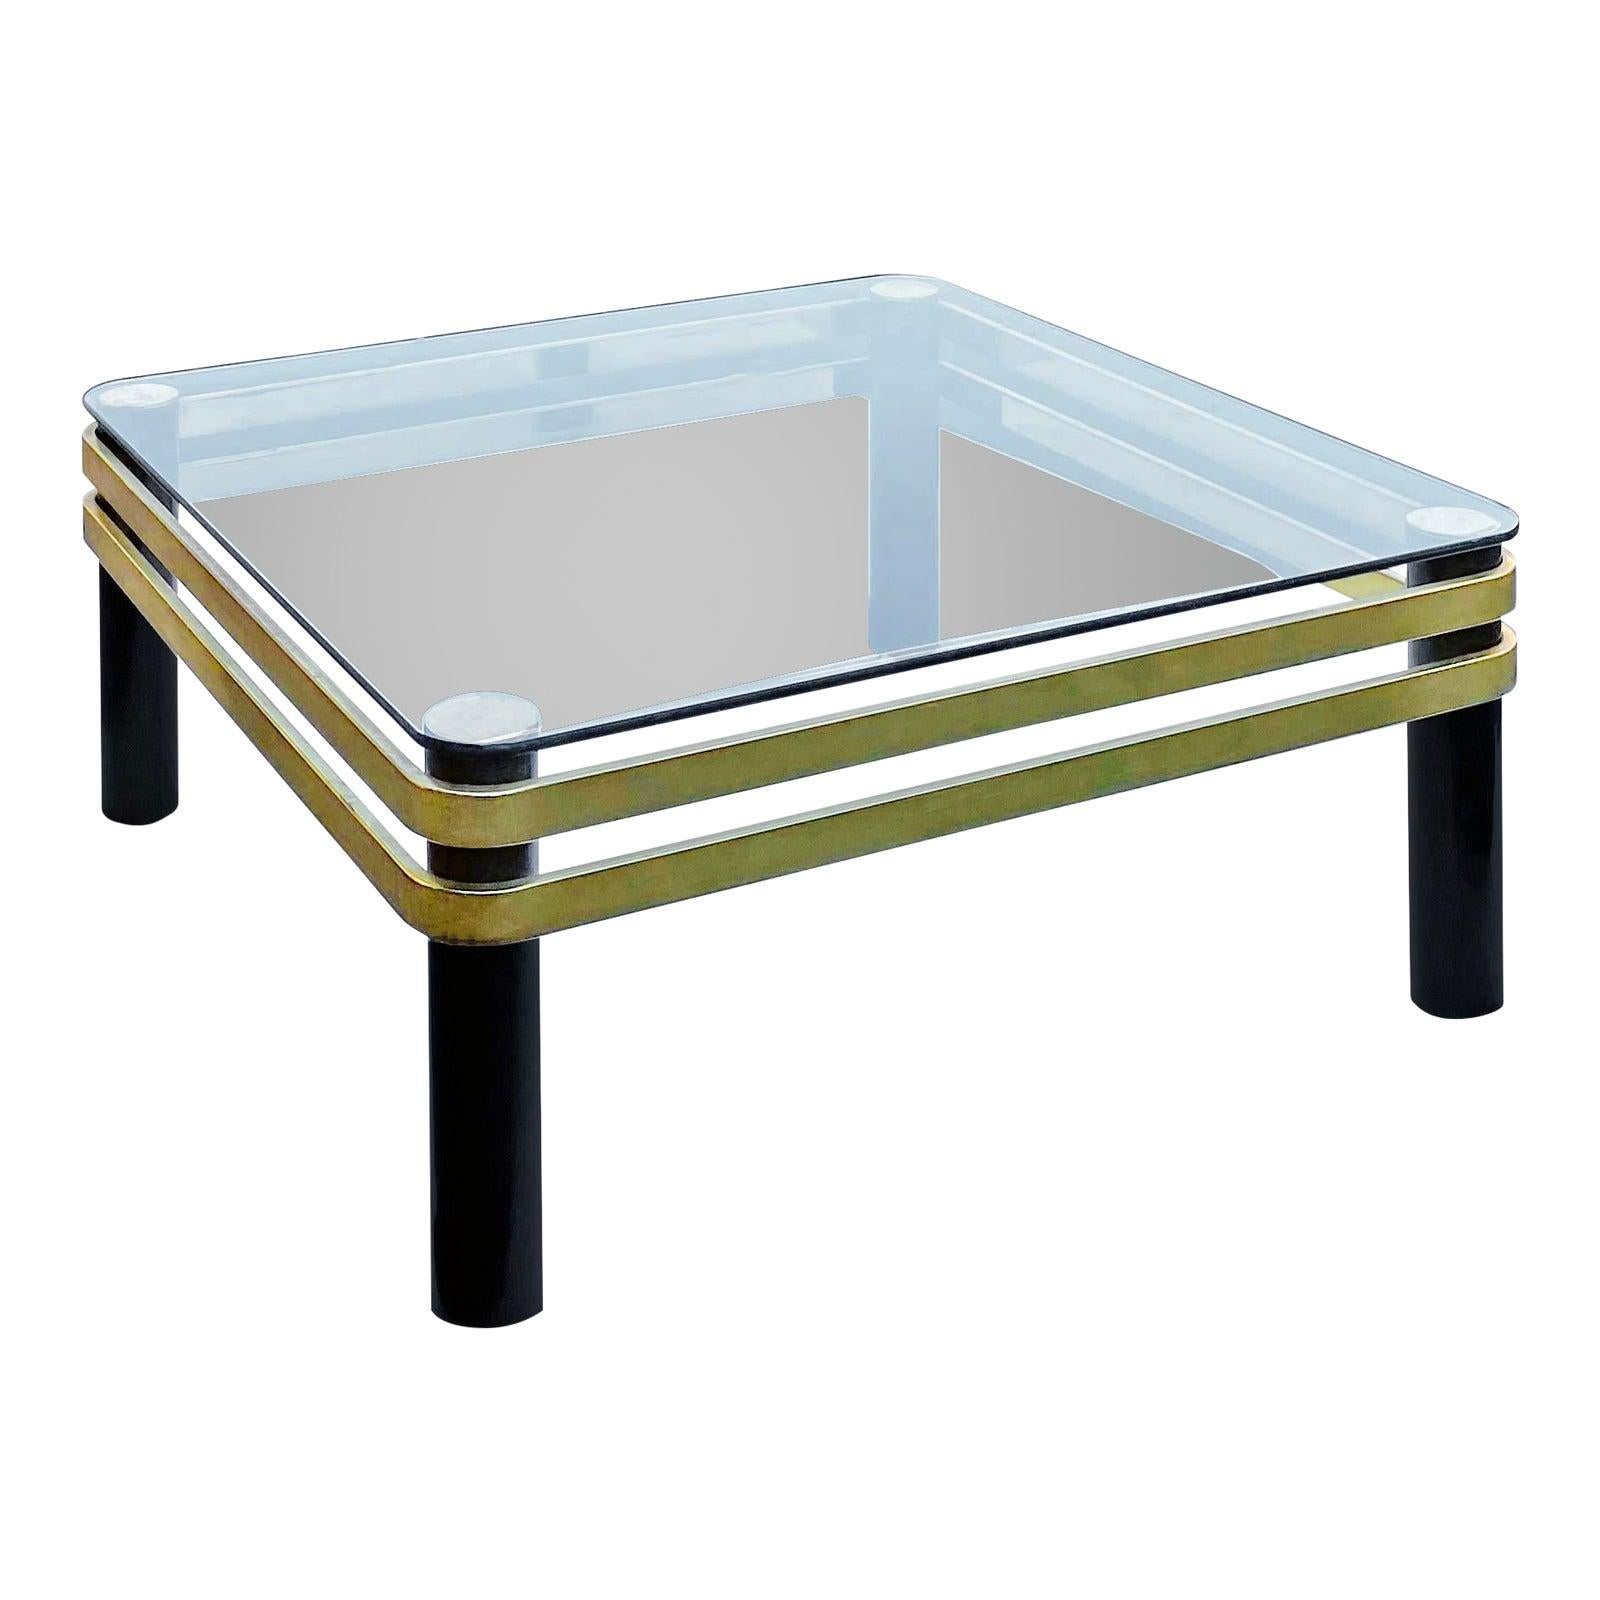 A beautiful 1970s brass banded and black lacquer tubular post coffee table with a glass top, by Pace Collection, with style attributed to Karl Springer. Beautiful, grand coffee table, in a hollywood regency and mid century modern style.